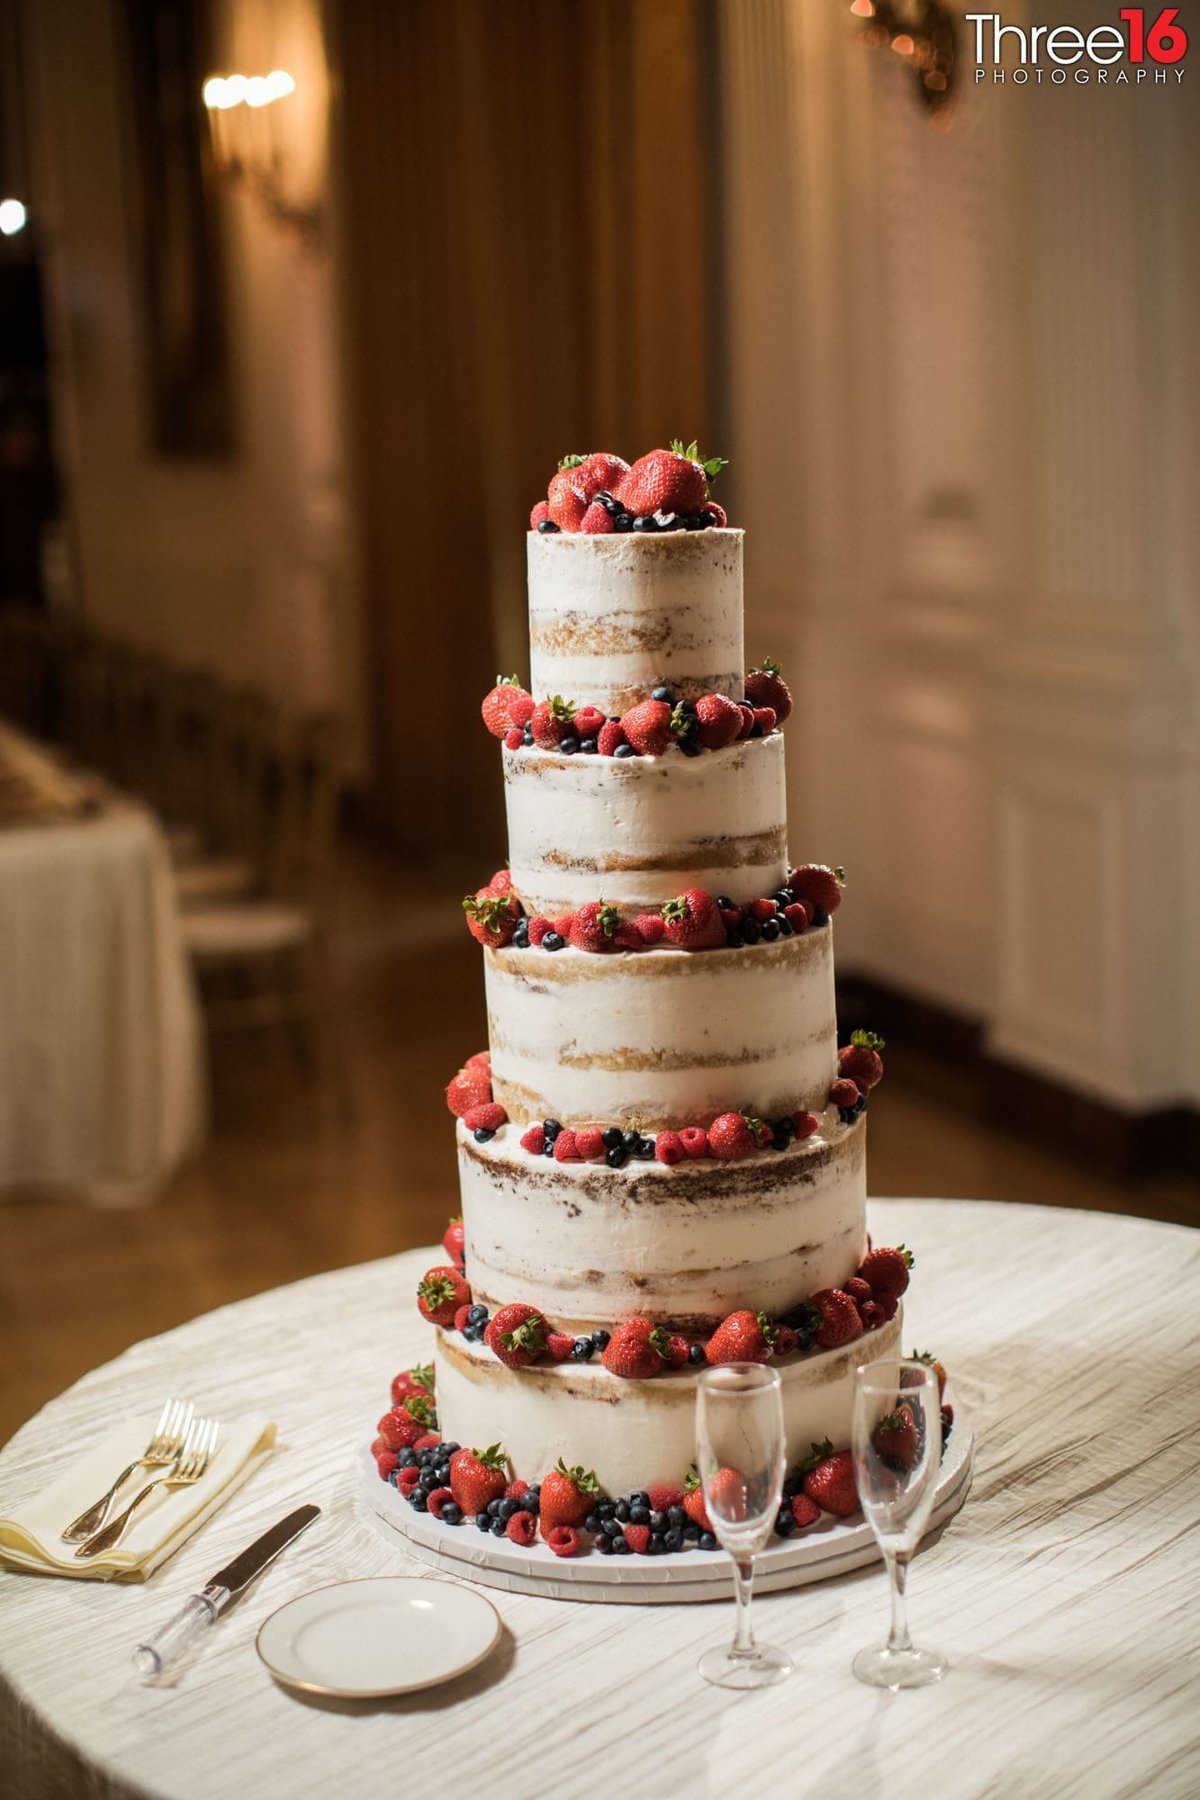 Amazing 5-tiered berry laced naked wedding cake